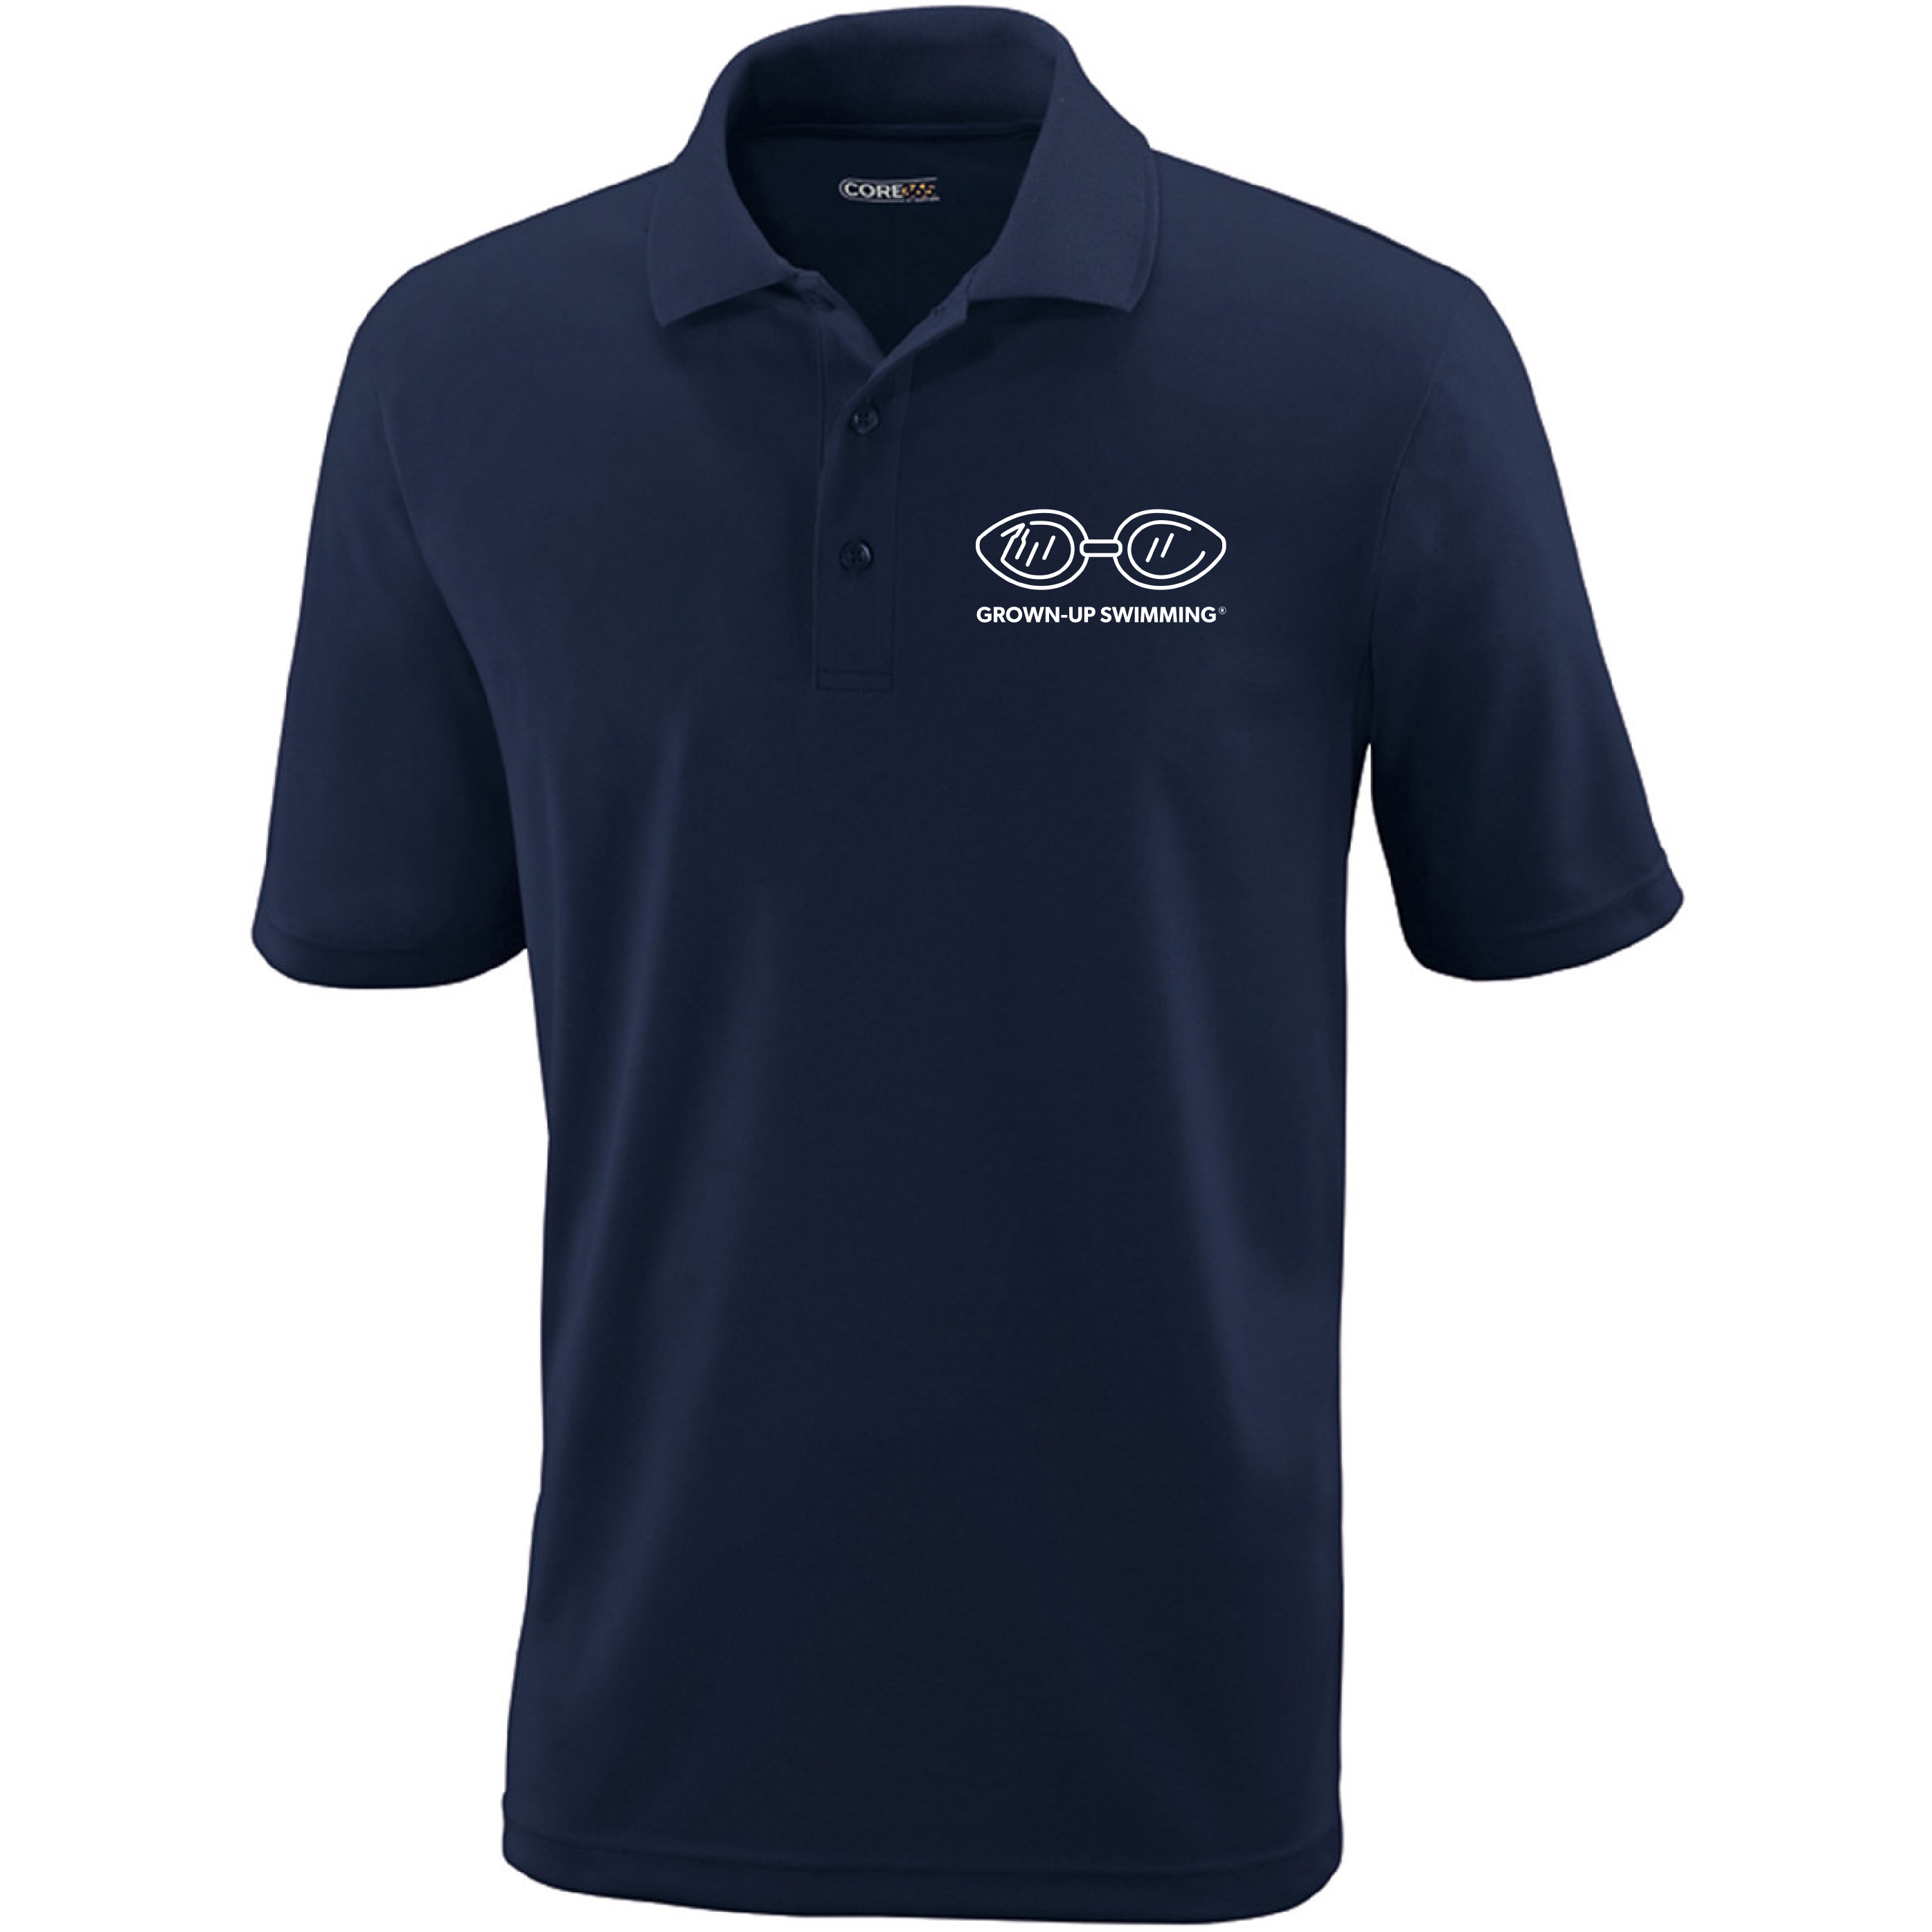 Men's Dri-Fit Polo (Customized) - Grown-Up